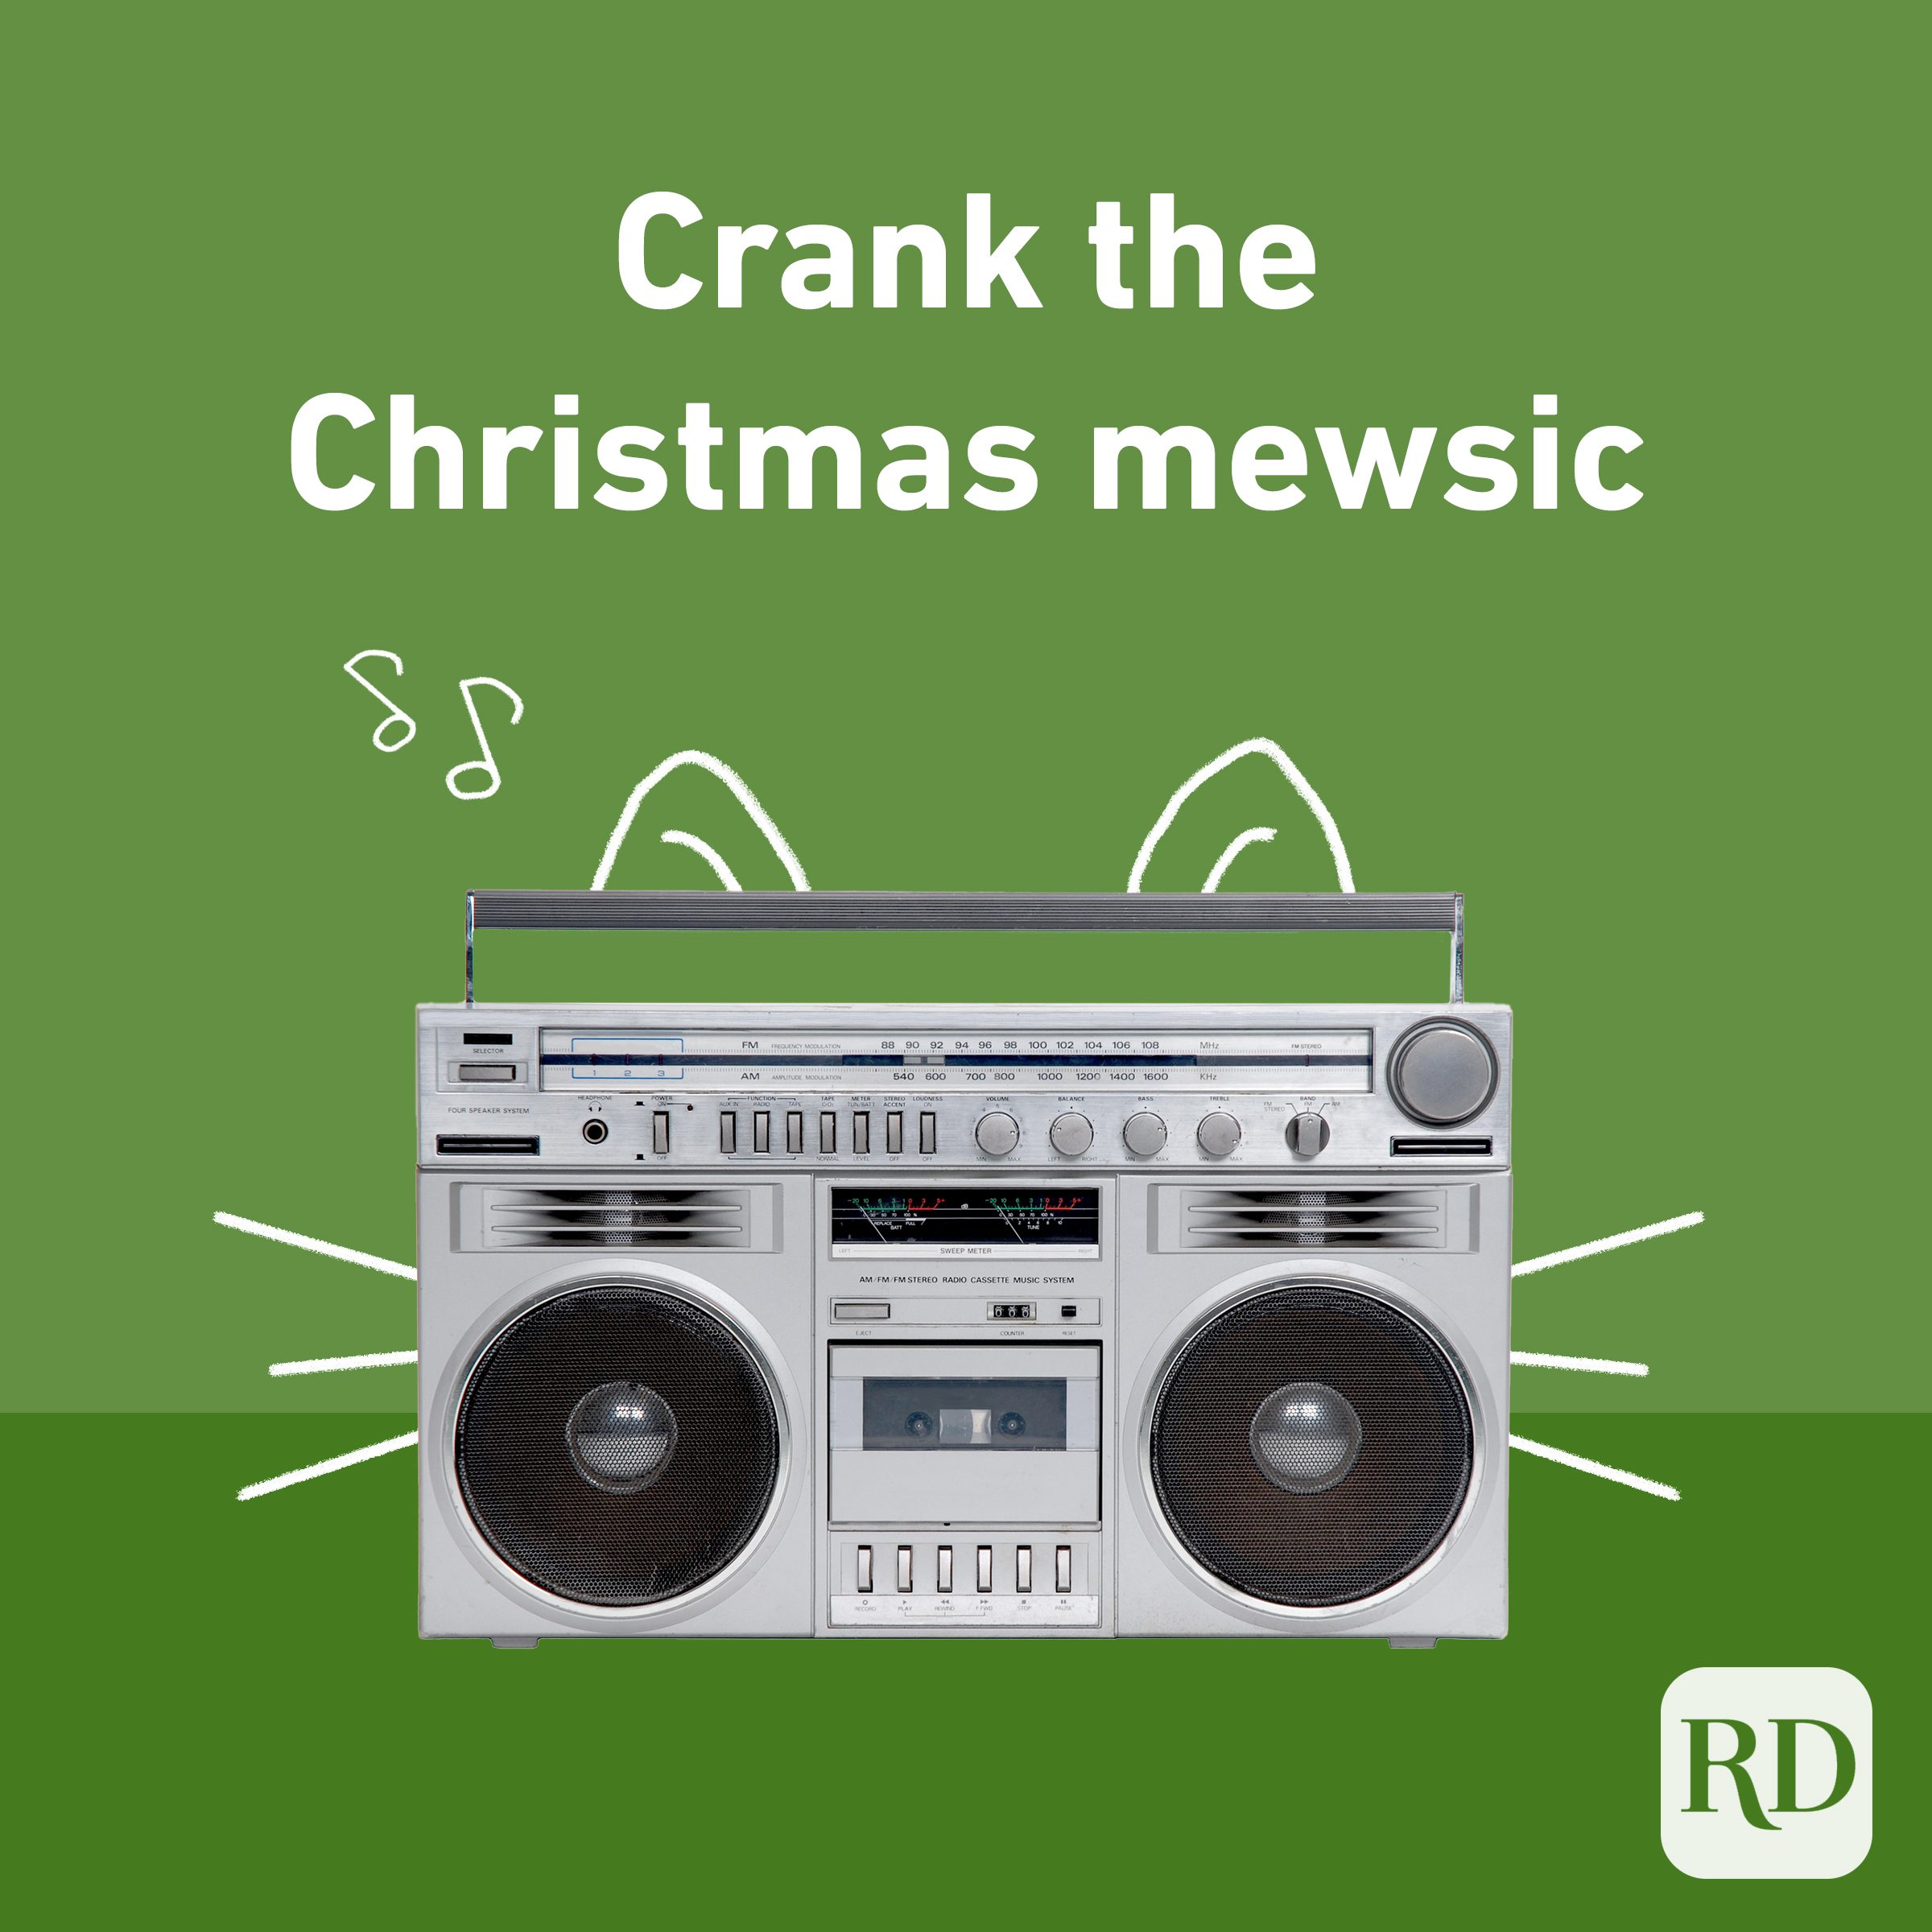 Crank the Christmas mewsic with boombox and cat ears drawn on